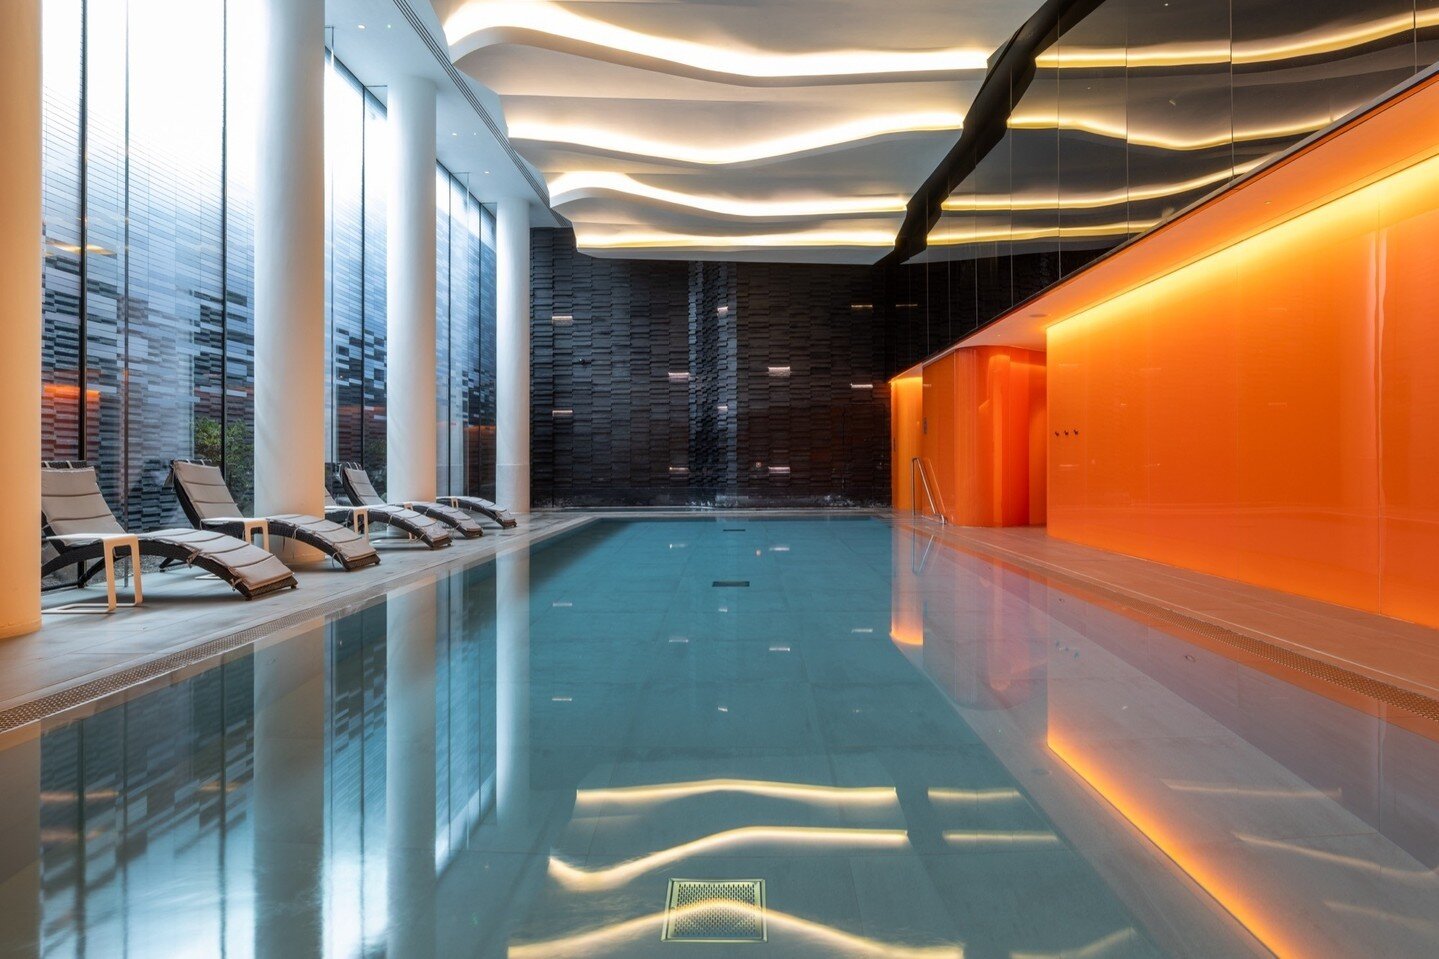 With an indoor heated pool, you can take a dip whenever your heart desires.⁠
⁠
#LondonProperty #LondonHomes #LondonRealEstate #LuxuryLondon #CityLivingLondon #LondonRealtor #PropertyMarketLondon #LondonHomebuyers #PrimeLondon #LondonPropertyInvestmen